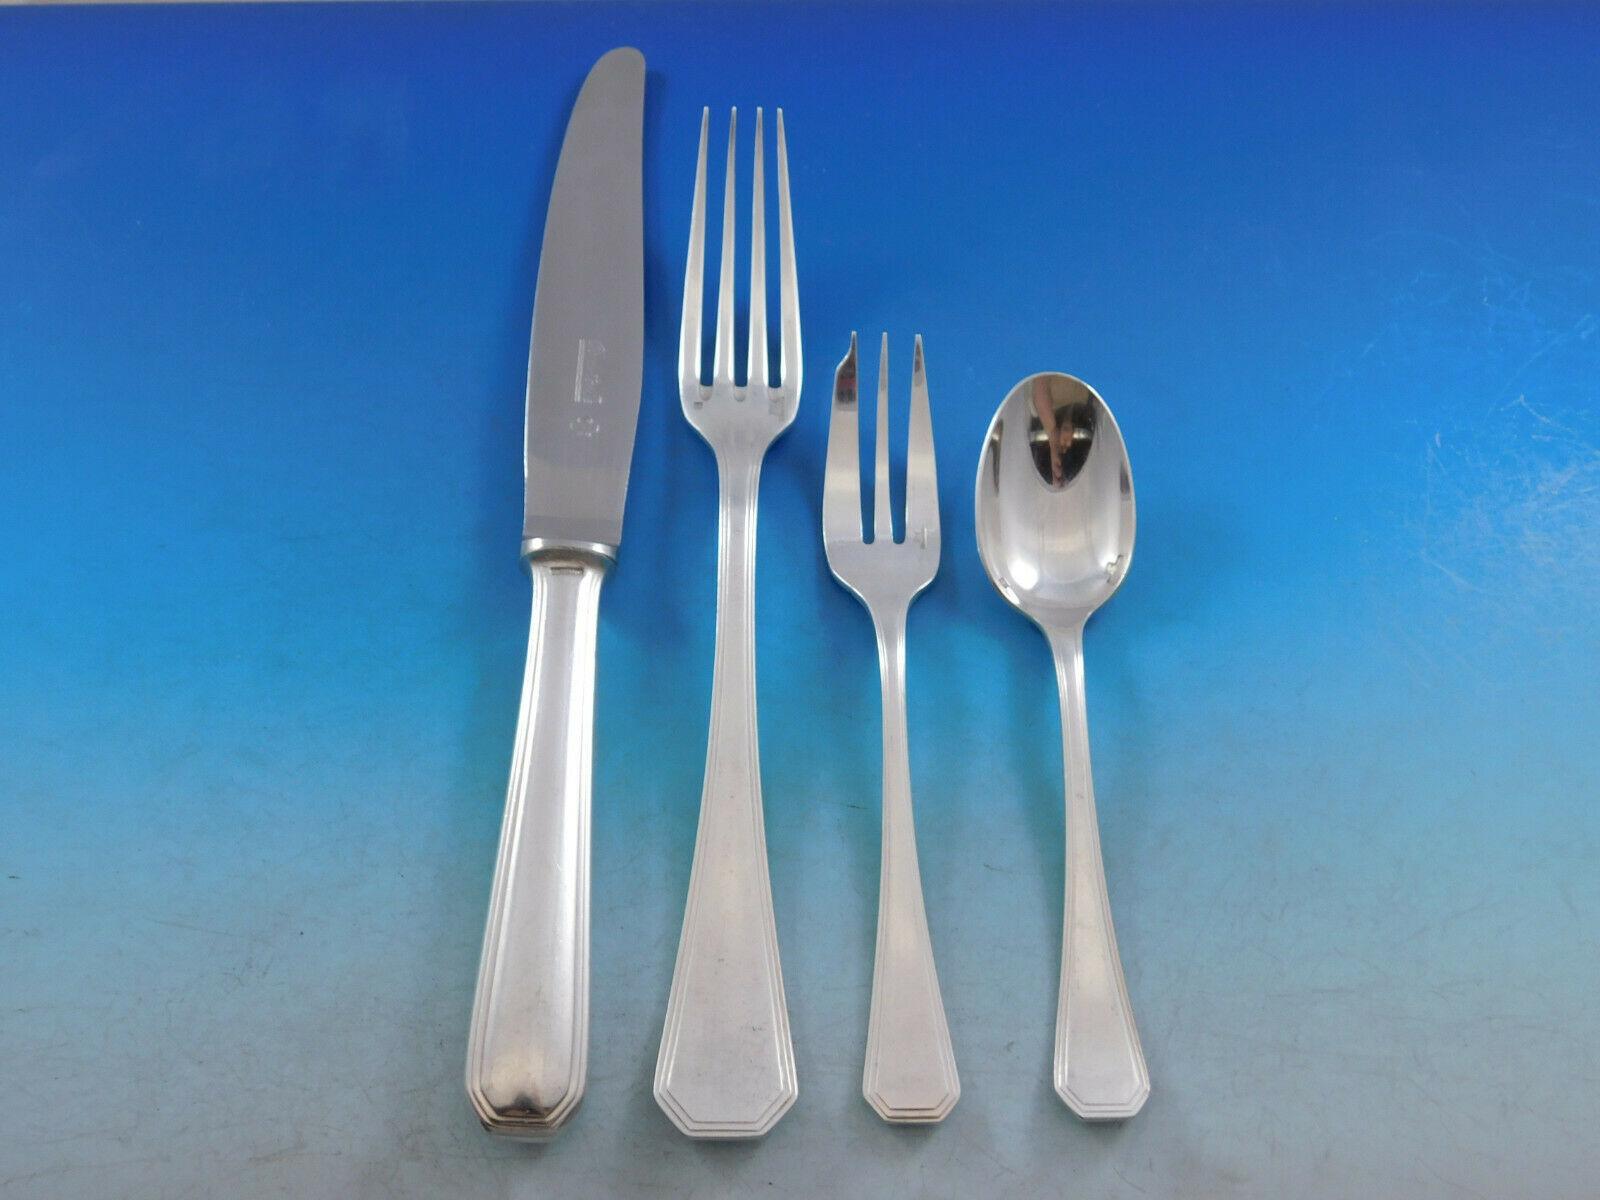 With a dedication to perfection and quality, Christofle flatware creations unite craftsmanship and modern technique, resulting in flatware to be handed down through generations. 
Monumental America by Christofle France estate Silverplate Flatware